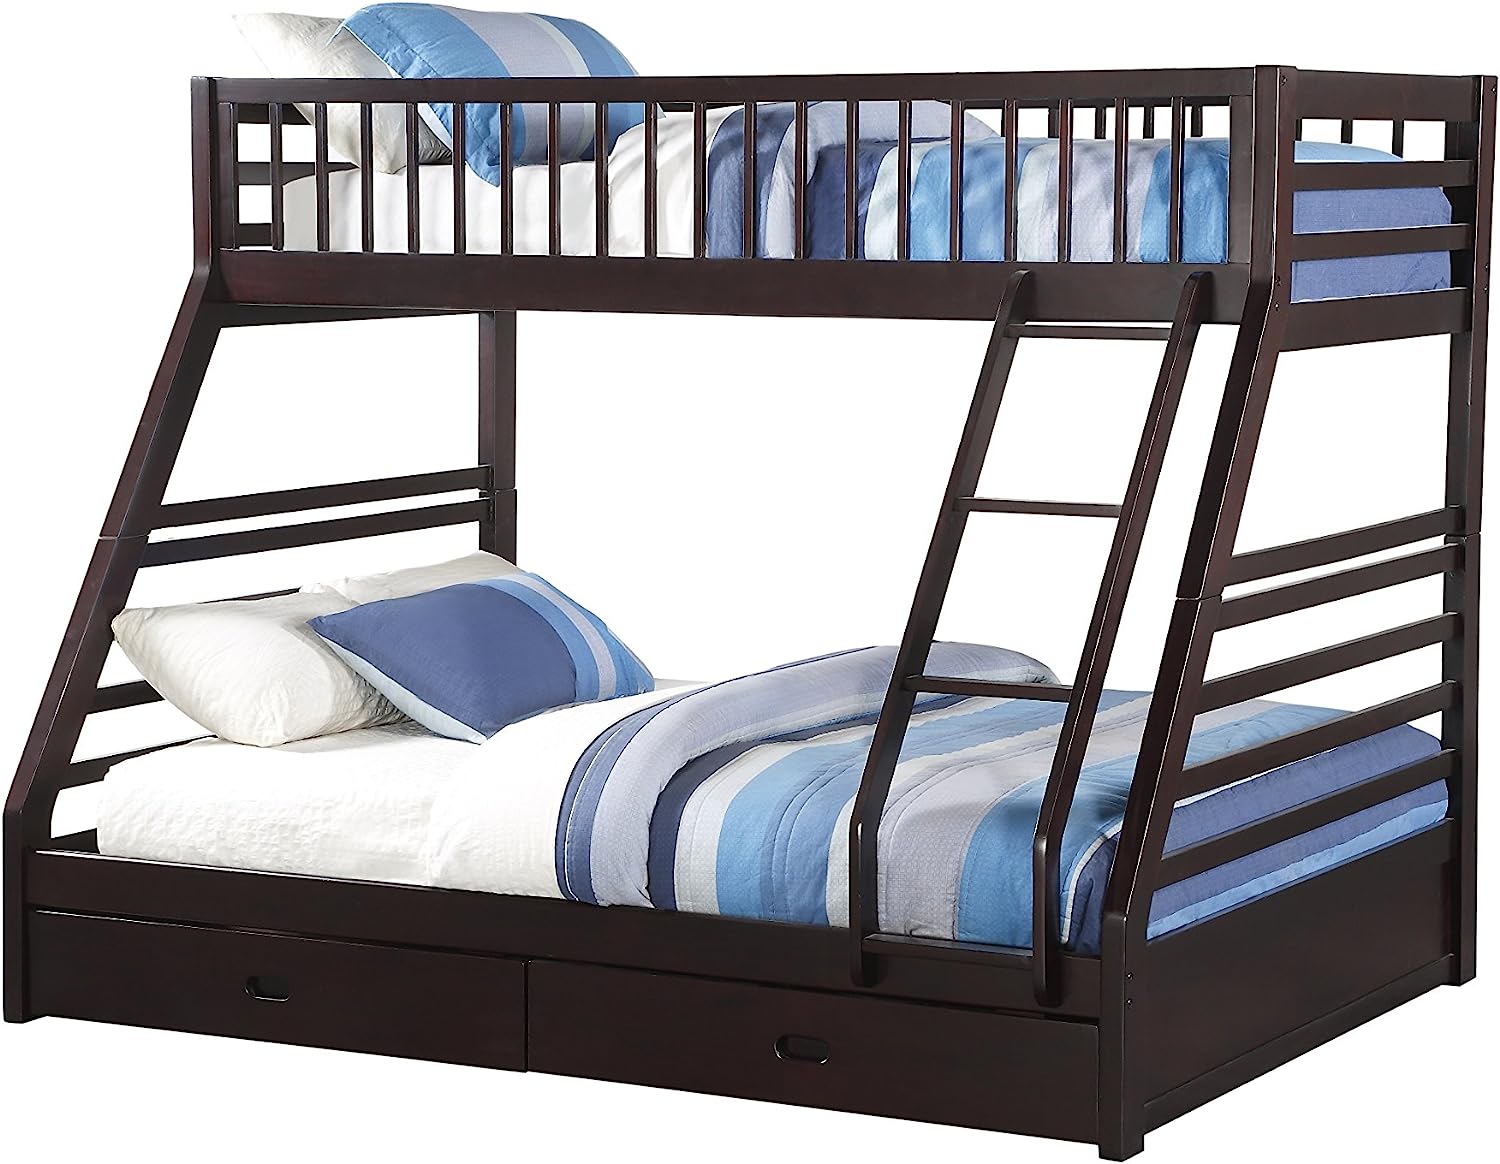 Acme Furniture XL Twin/Queen Bunk Bed with Drawers, Espresso (AC-37425)